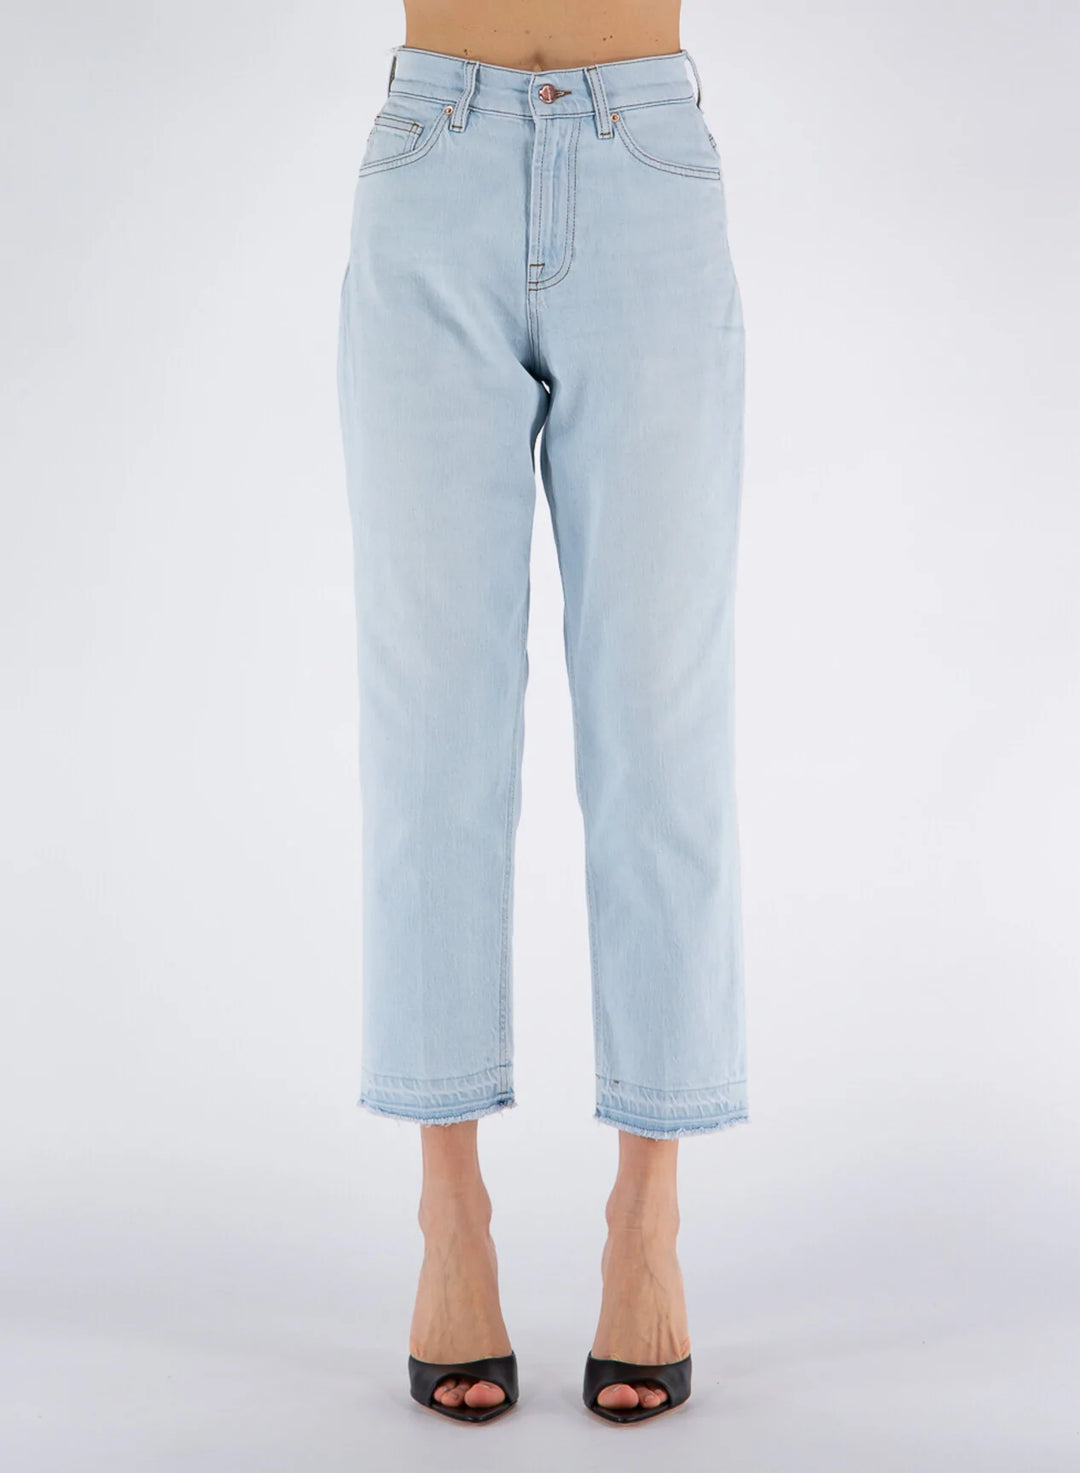 Don The Fuller Light Blue Cotton Jeans & Pant Don The Fuller, feed-1, Jeans & Pants - Women - Clothing, Light Blue, W25 | IT39 at SEYMAYKA